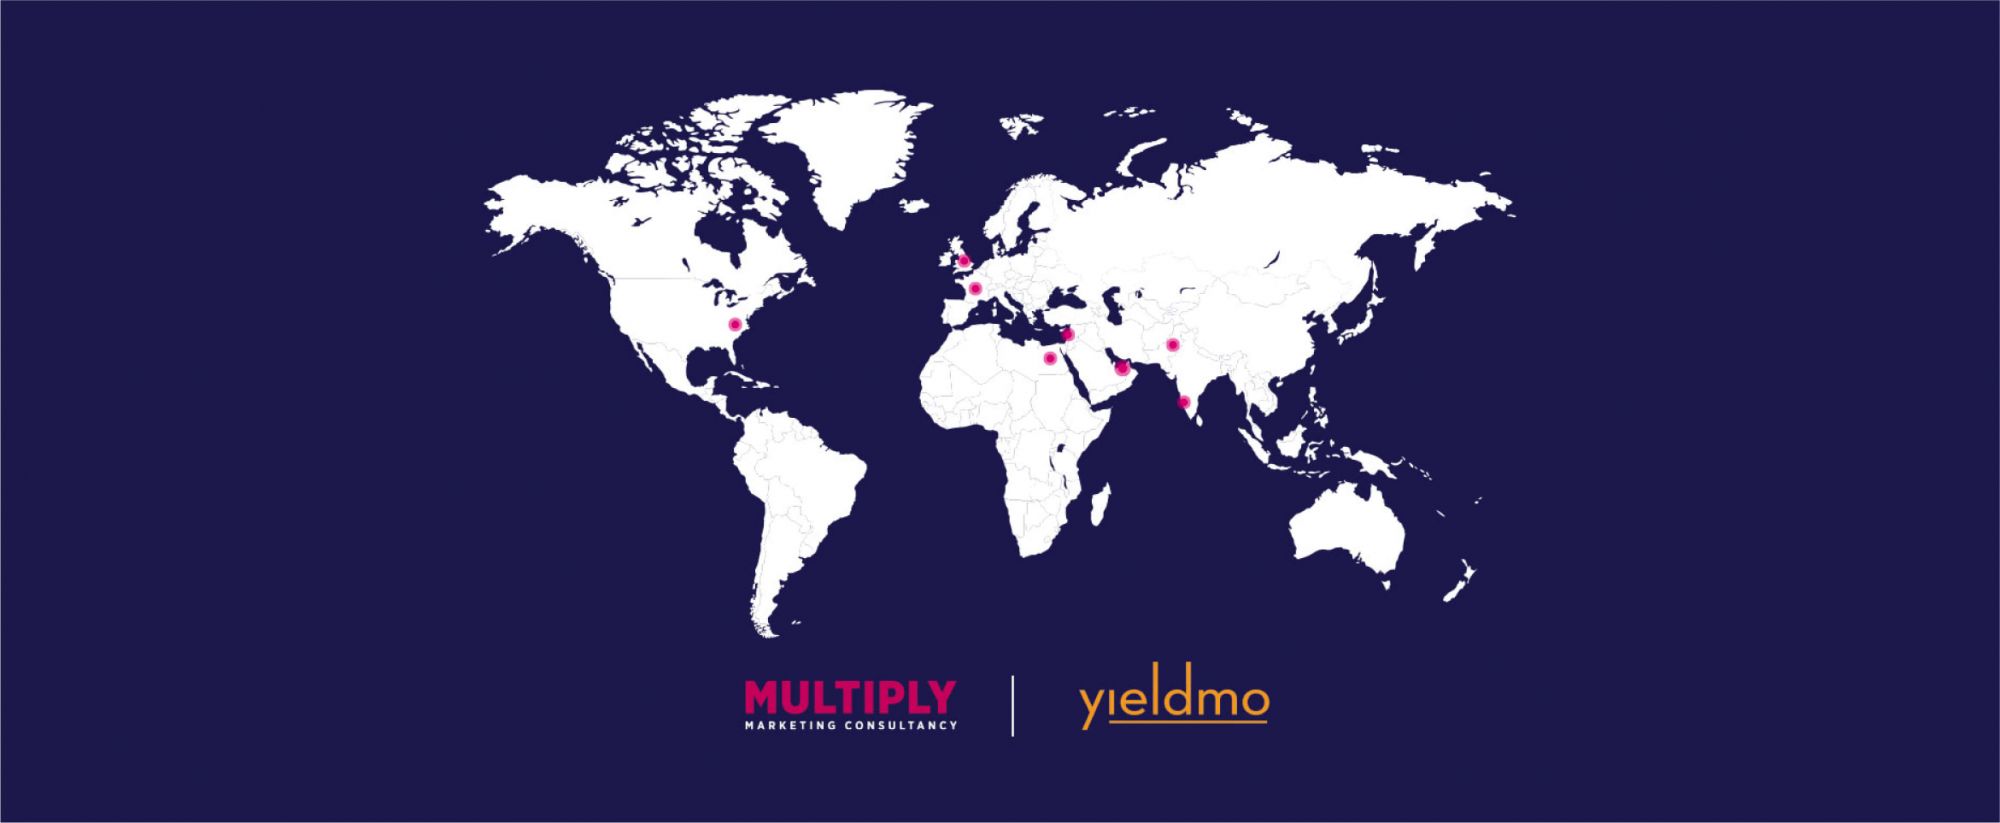 Multiply has acquired a stake in US advertising firm Yieldmo